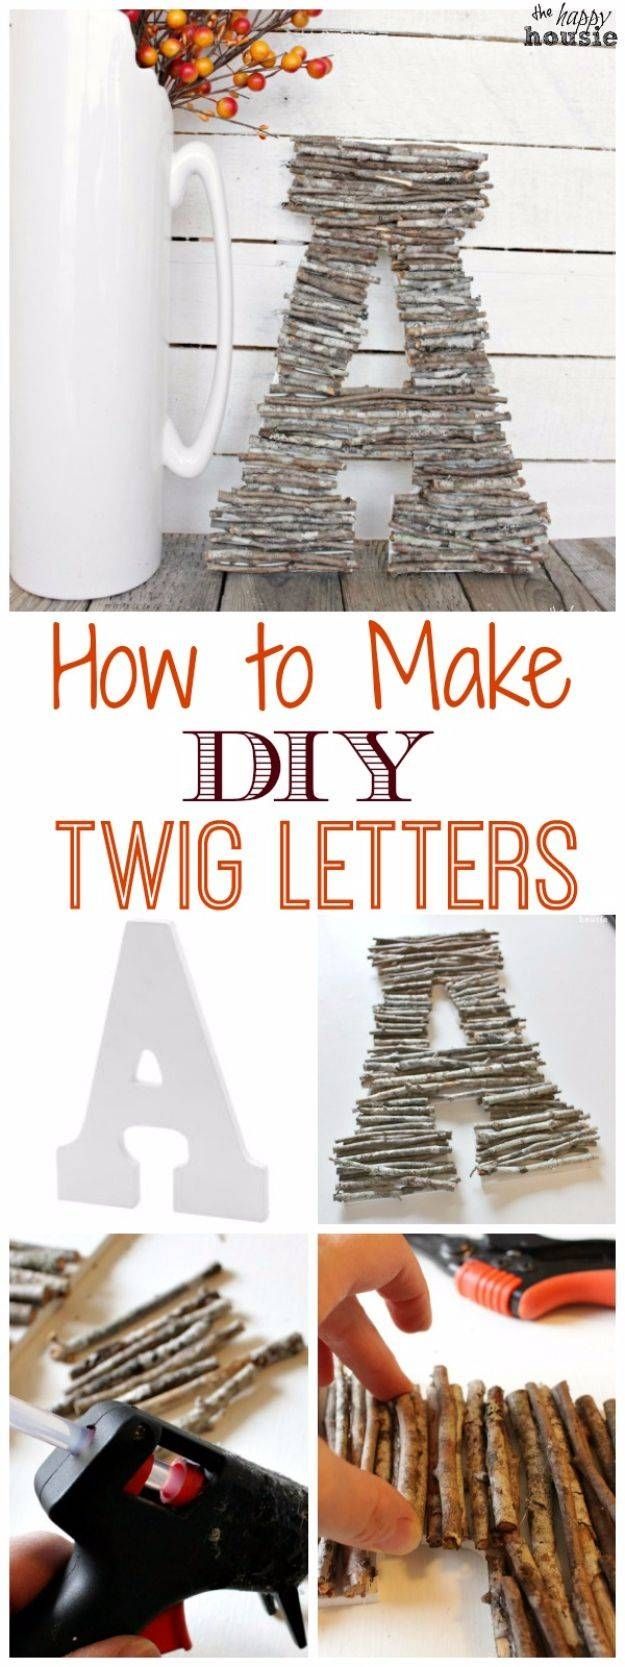 25+ Unique Letter Wall Art Ideas On Pinterest | Letters On Wall Intended For Recent Pinterest Diy Wall Art (View 20 of 25)